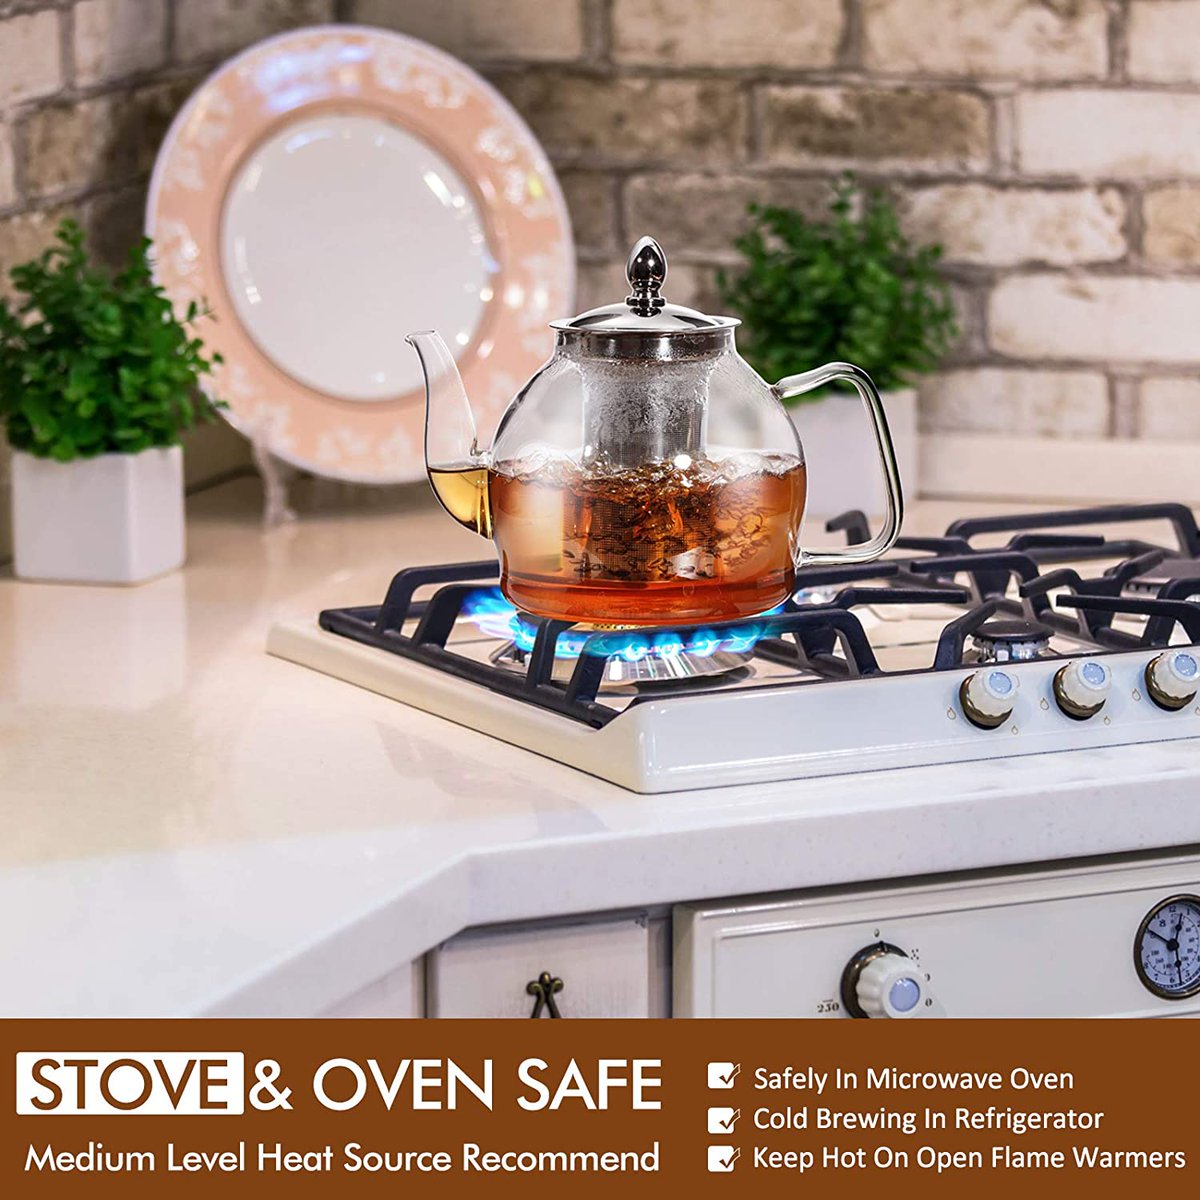 Glass Tea Kettle Stove Top – Upgrade Your Next Tea-Making Experience
kitchenbestreviews.com/glass-tea-kett…
#teakettle #tea #teapot #teatime #kettle #tealover #teapots #teacup #tealovers #coffee #teaware #gongfucha #kitchen #homeappliances #electrickettle #kitchenware #cookware #gongfutea